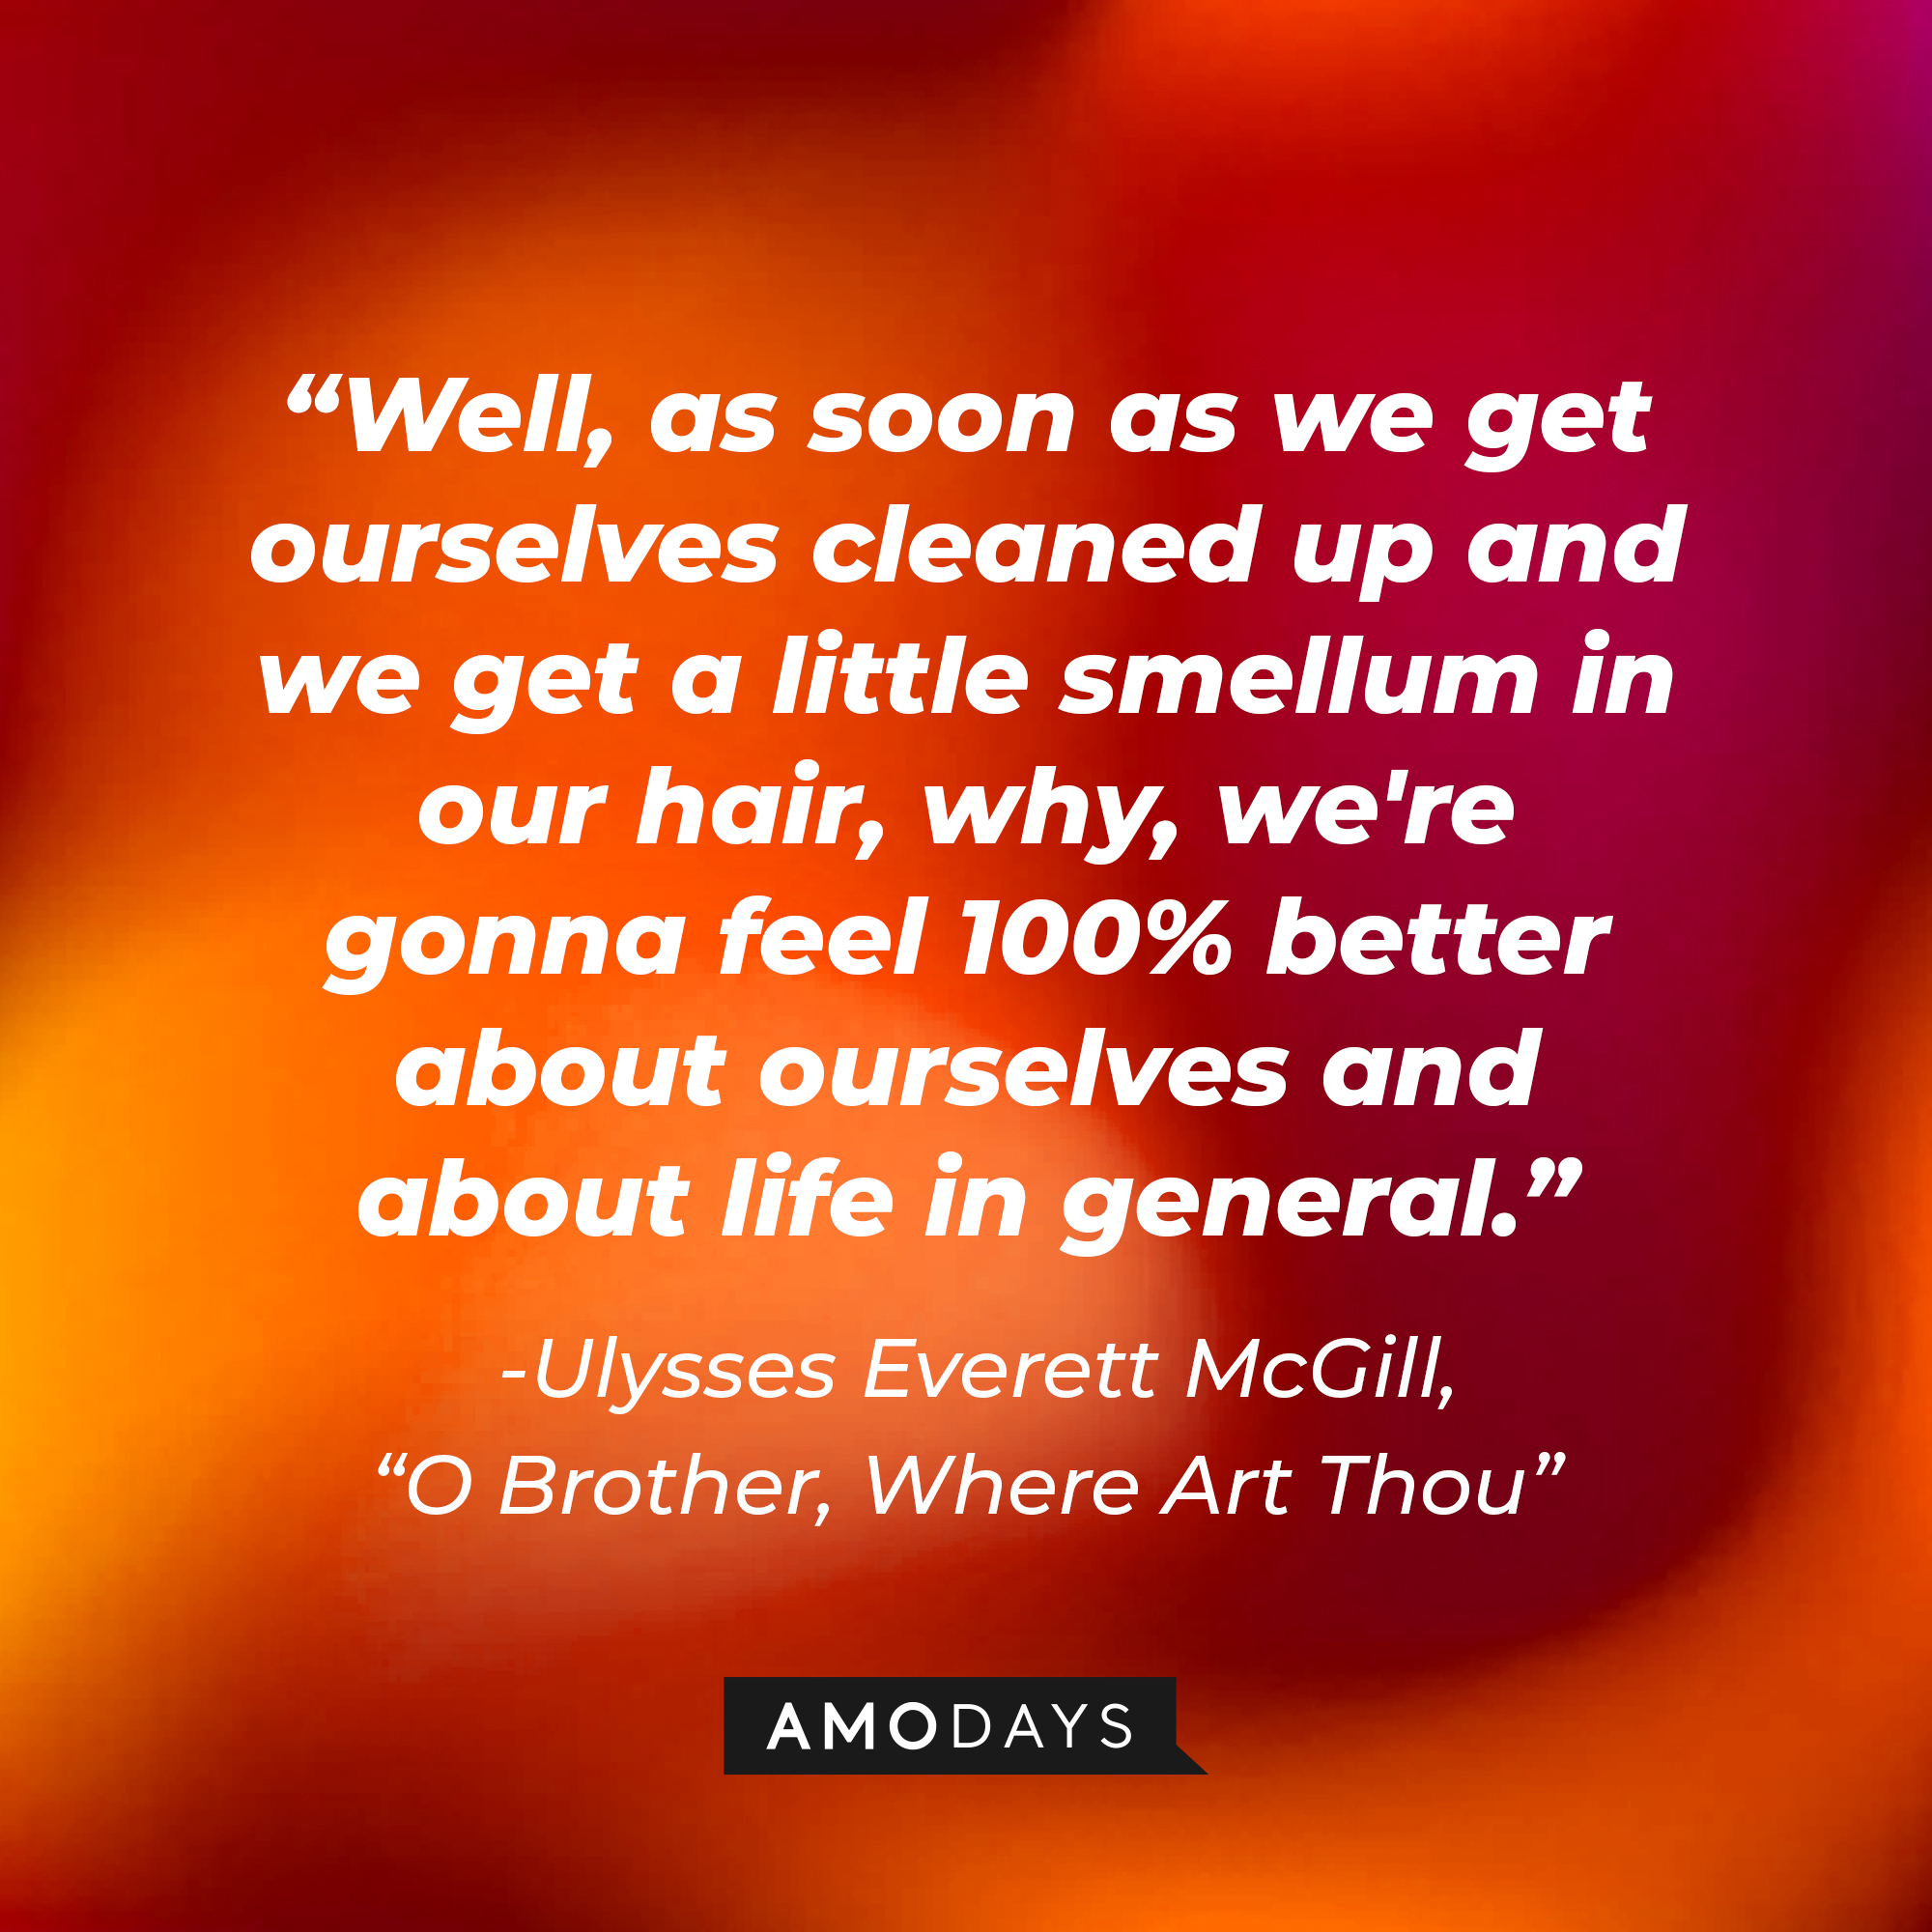 Ulysses Everett McGill's quote in "O Brother, Where Art Thou:" "Well, as soon as we get ourselves cleaned up and we get a little smellum in our hair, why, we're gonna feel 100% better about ourselves and about life in general." | Source: AmoDays